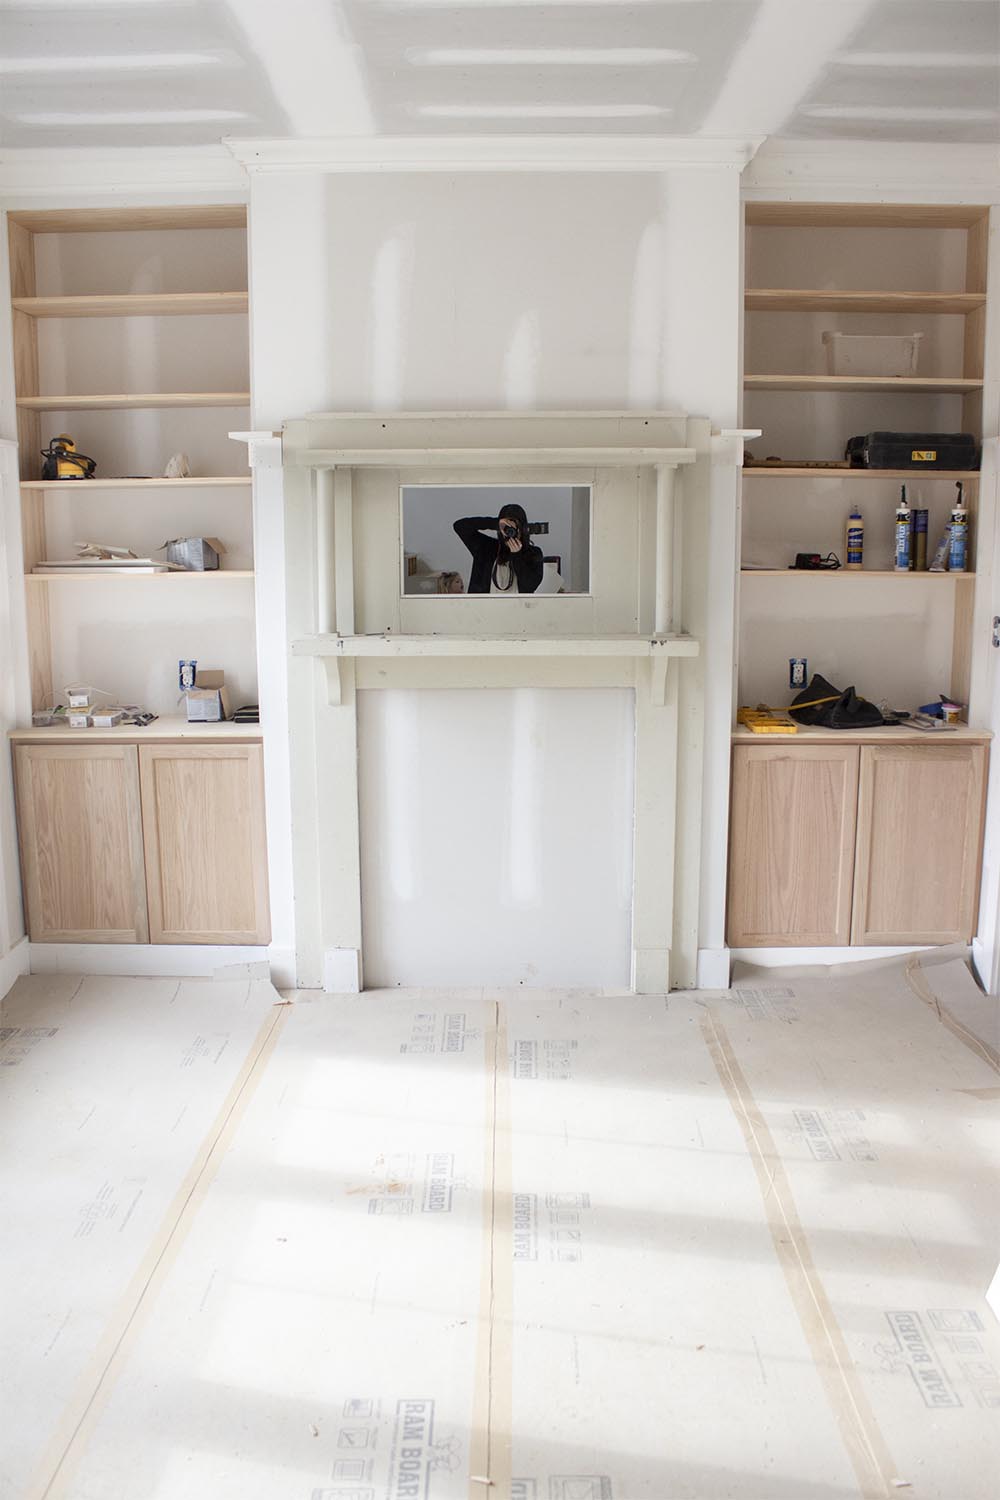 Diy Built In China Cabinets At The